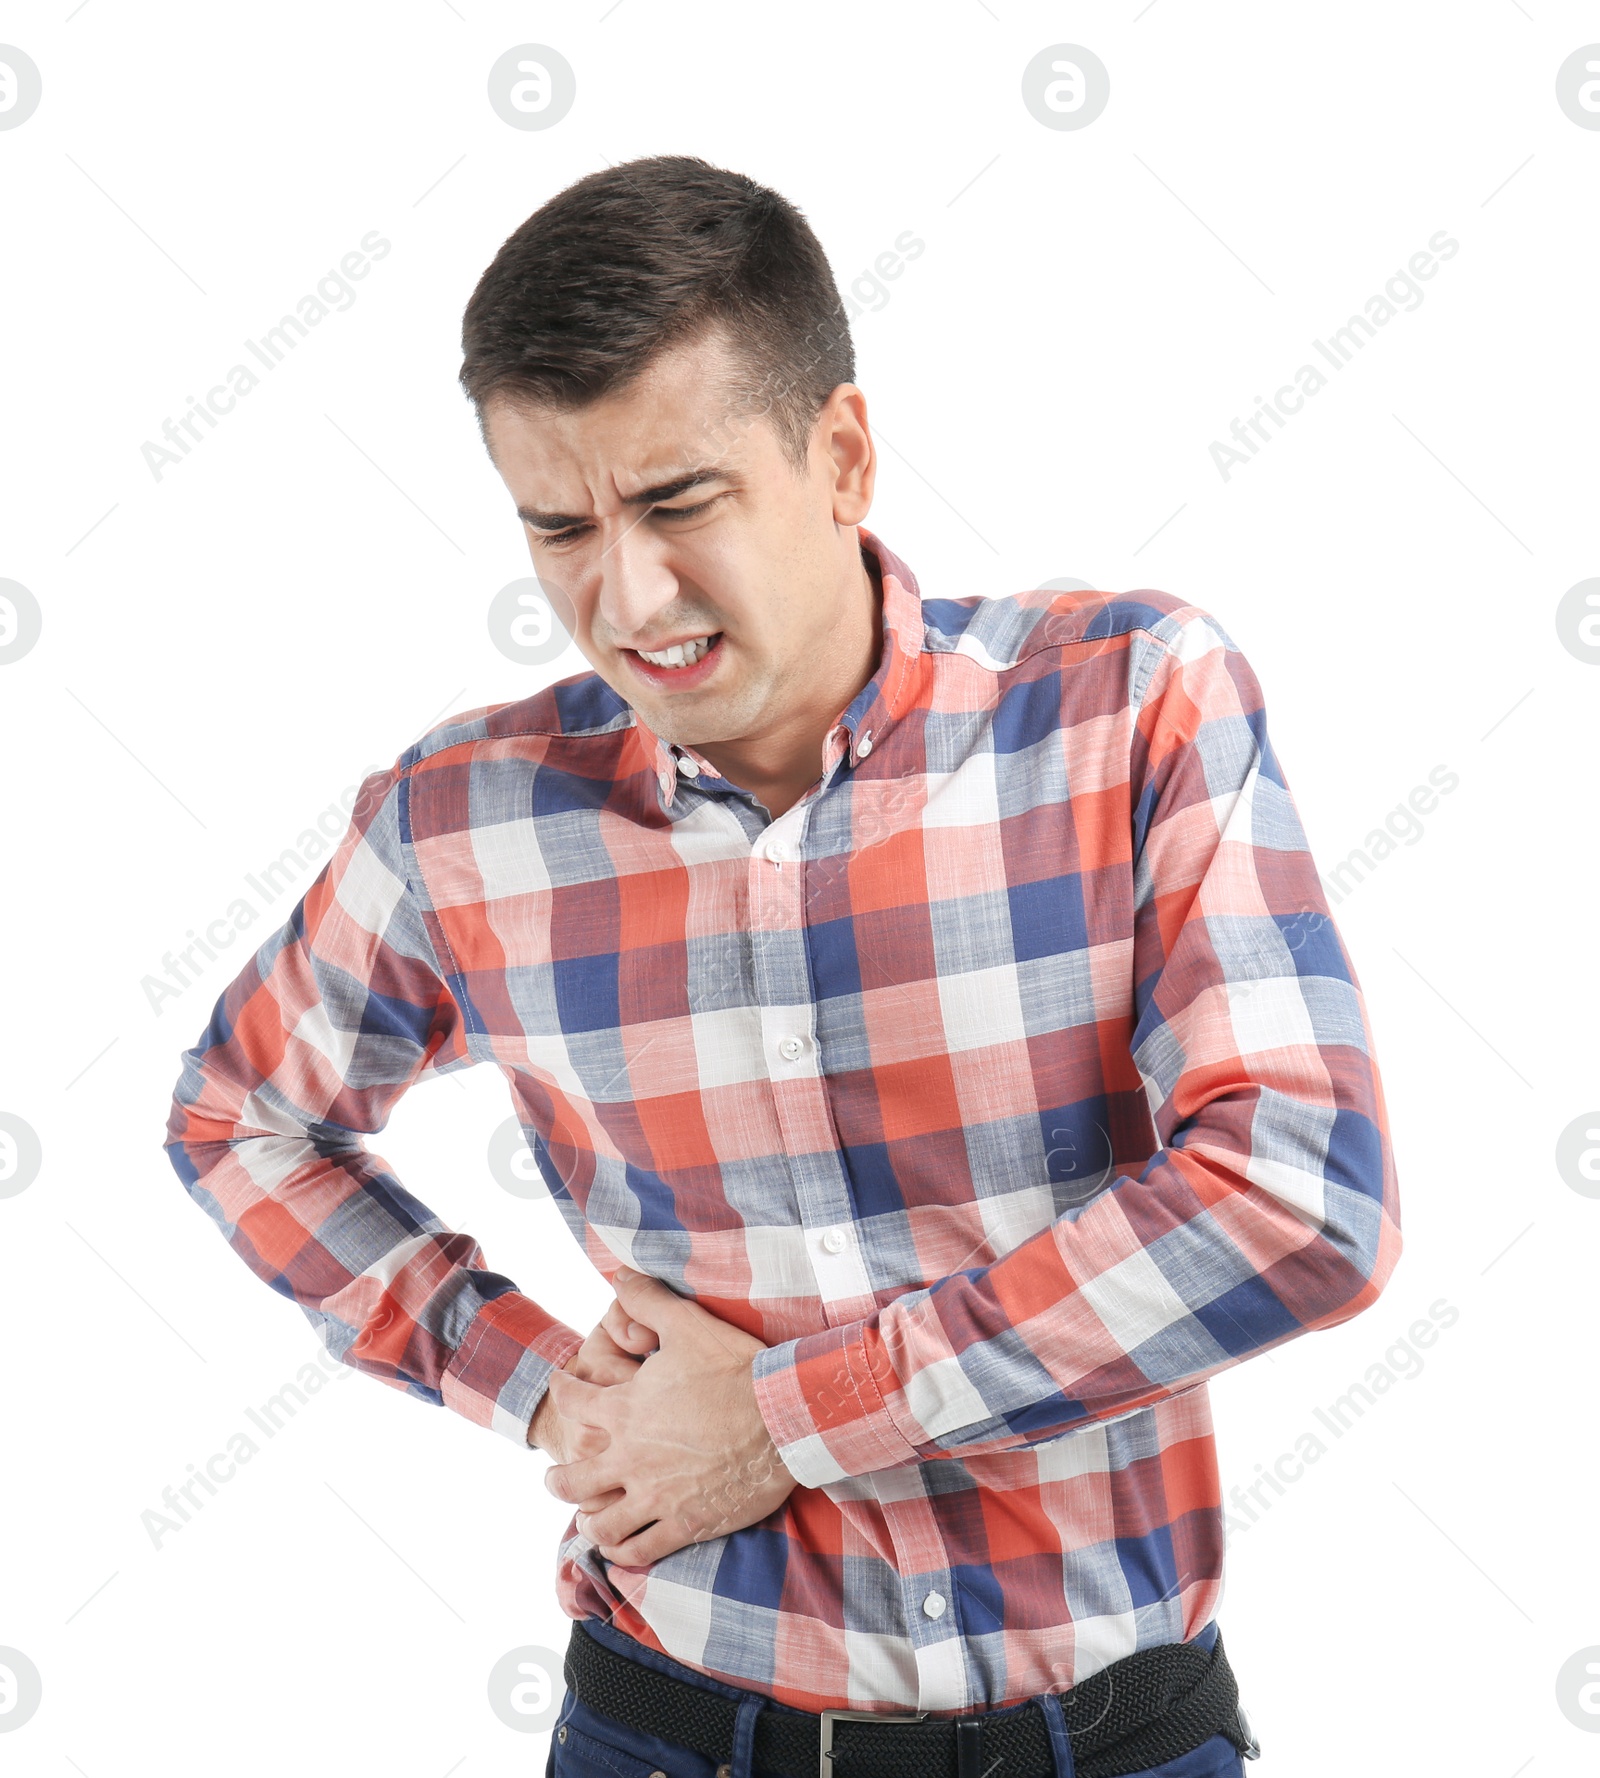 Photo of Man suffering from flank pain on white background